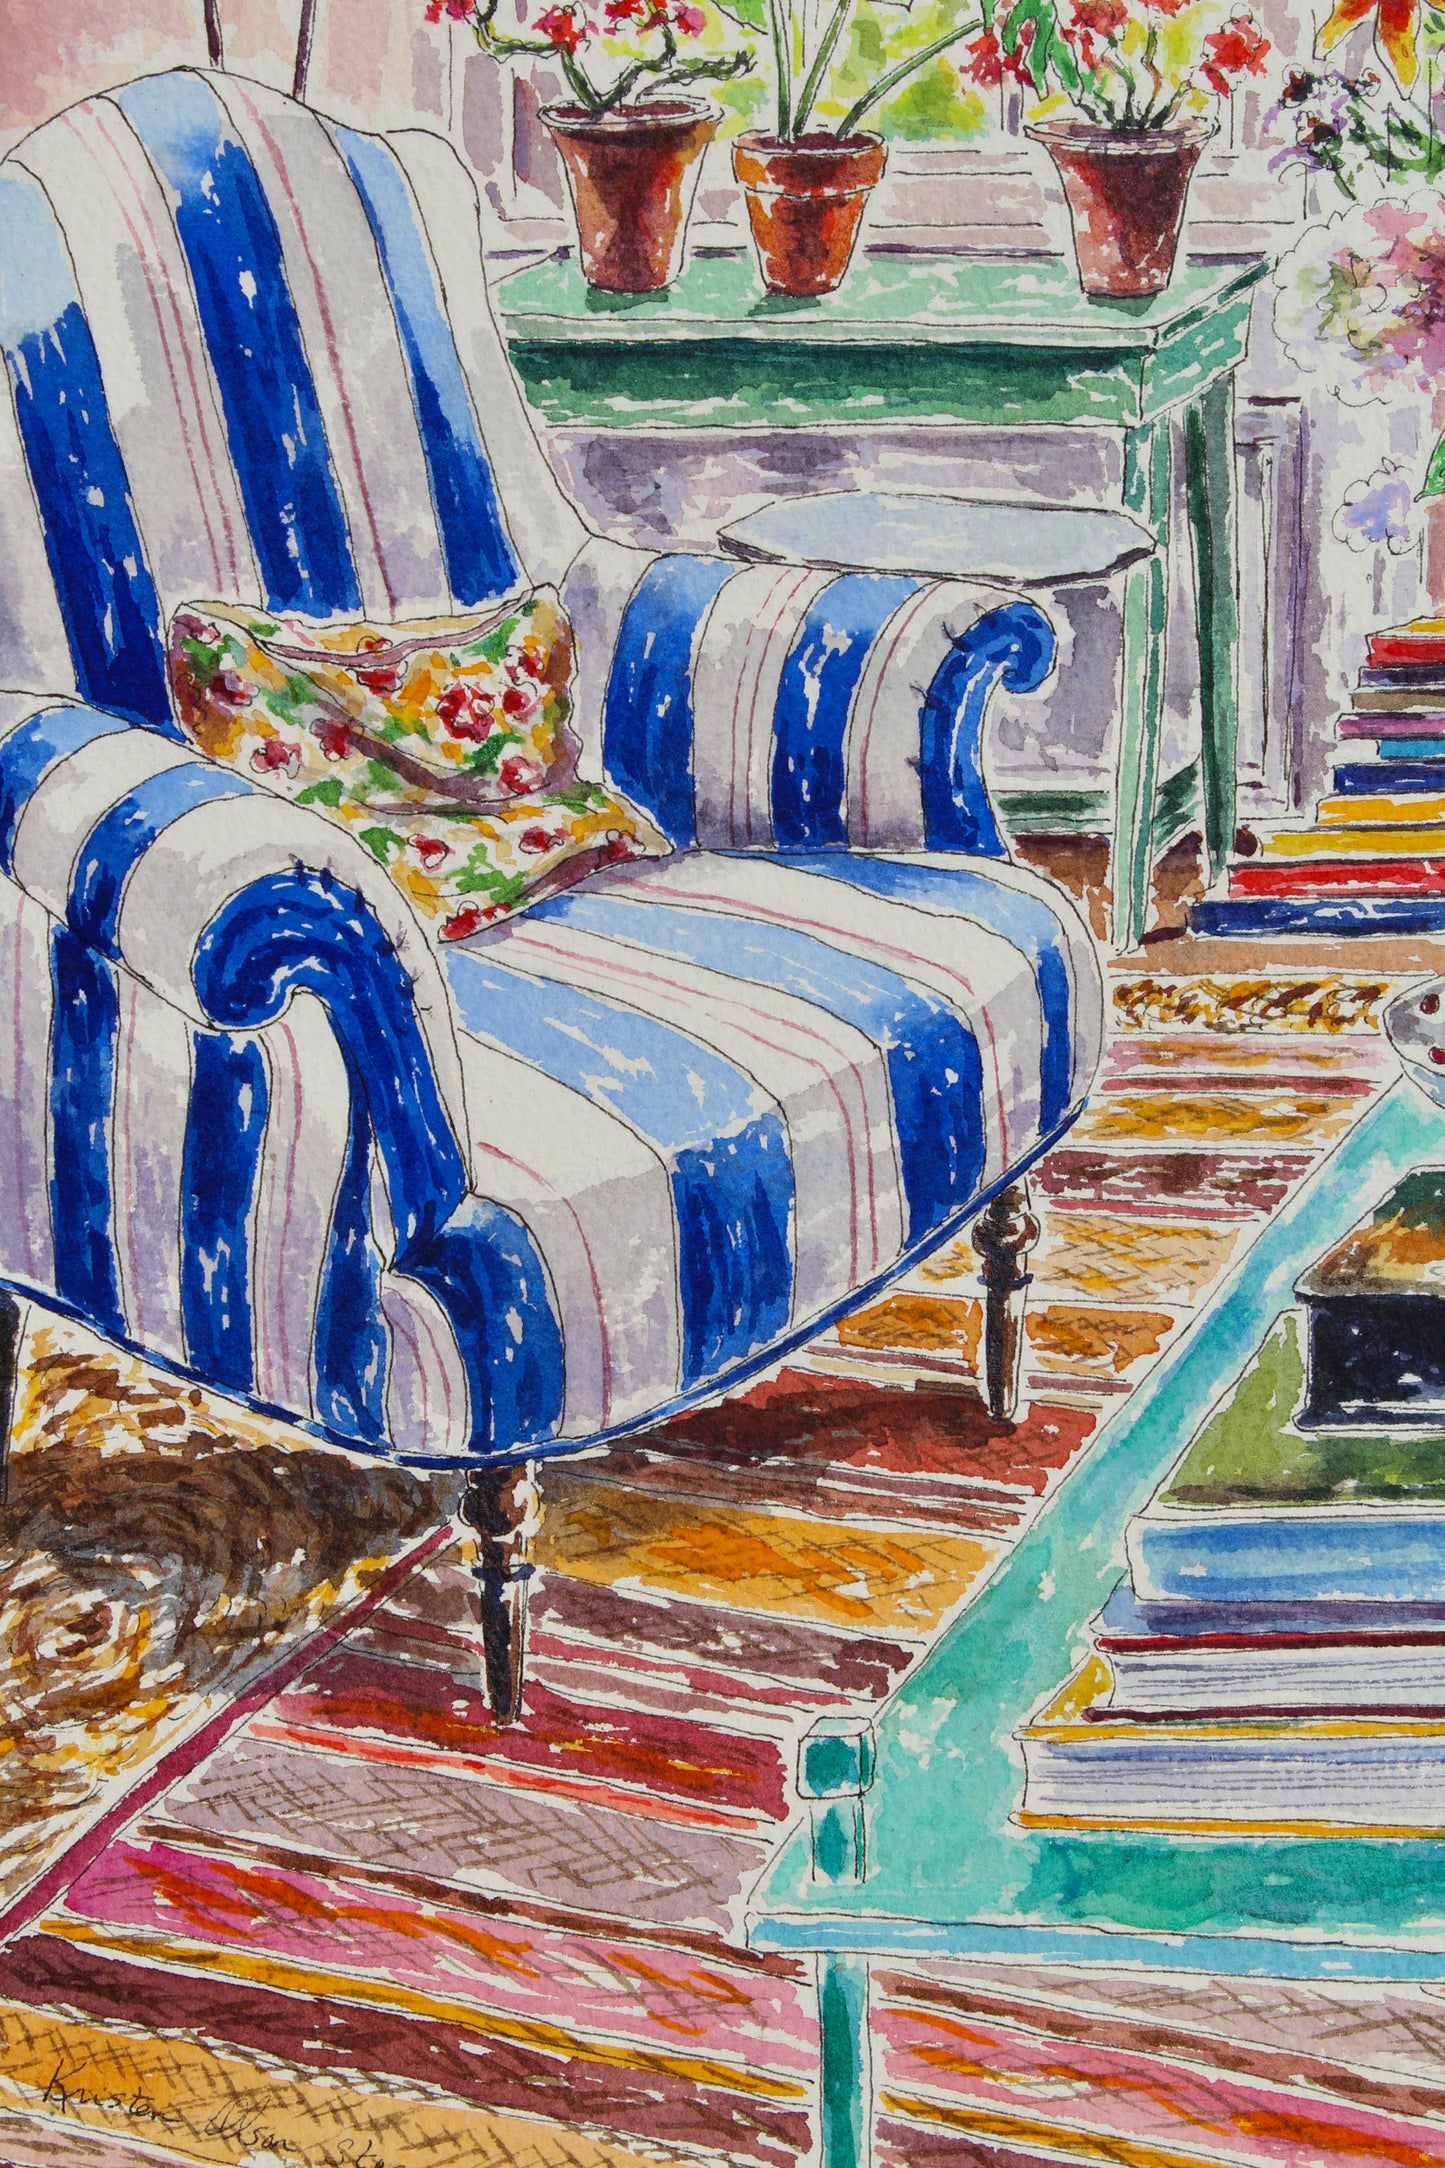 Delightful Escape, An Original 16" x 12" Watercolor And Ink Painting Of A Blue Striped Chair And Interior Decor